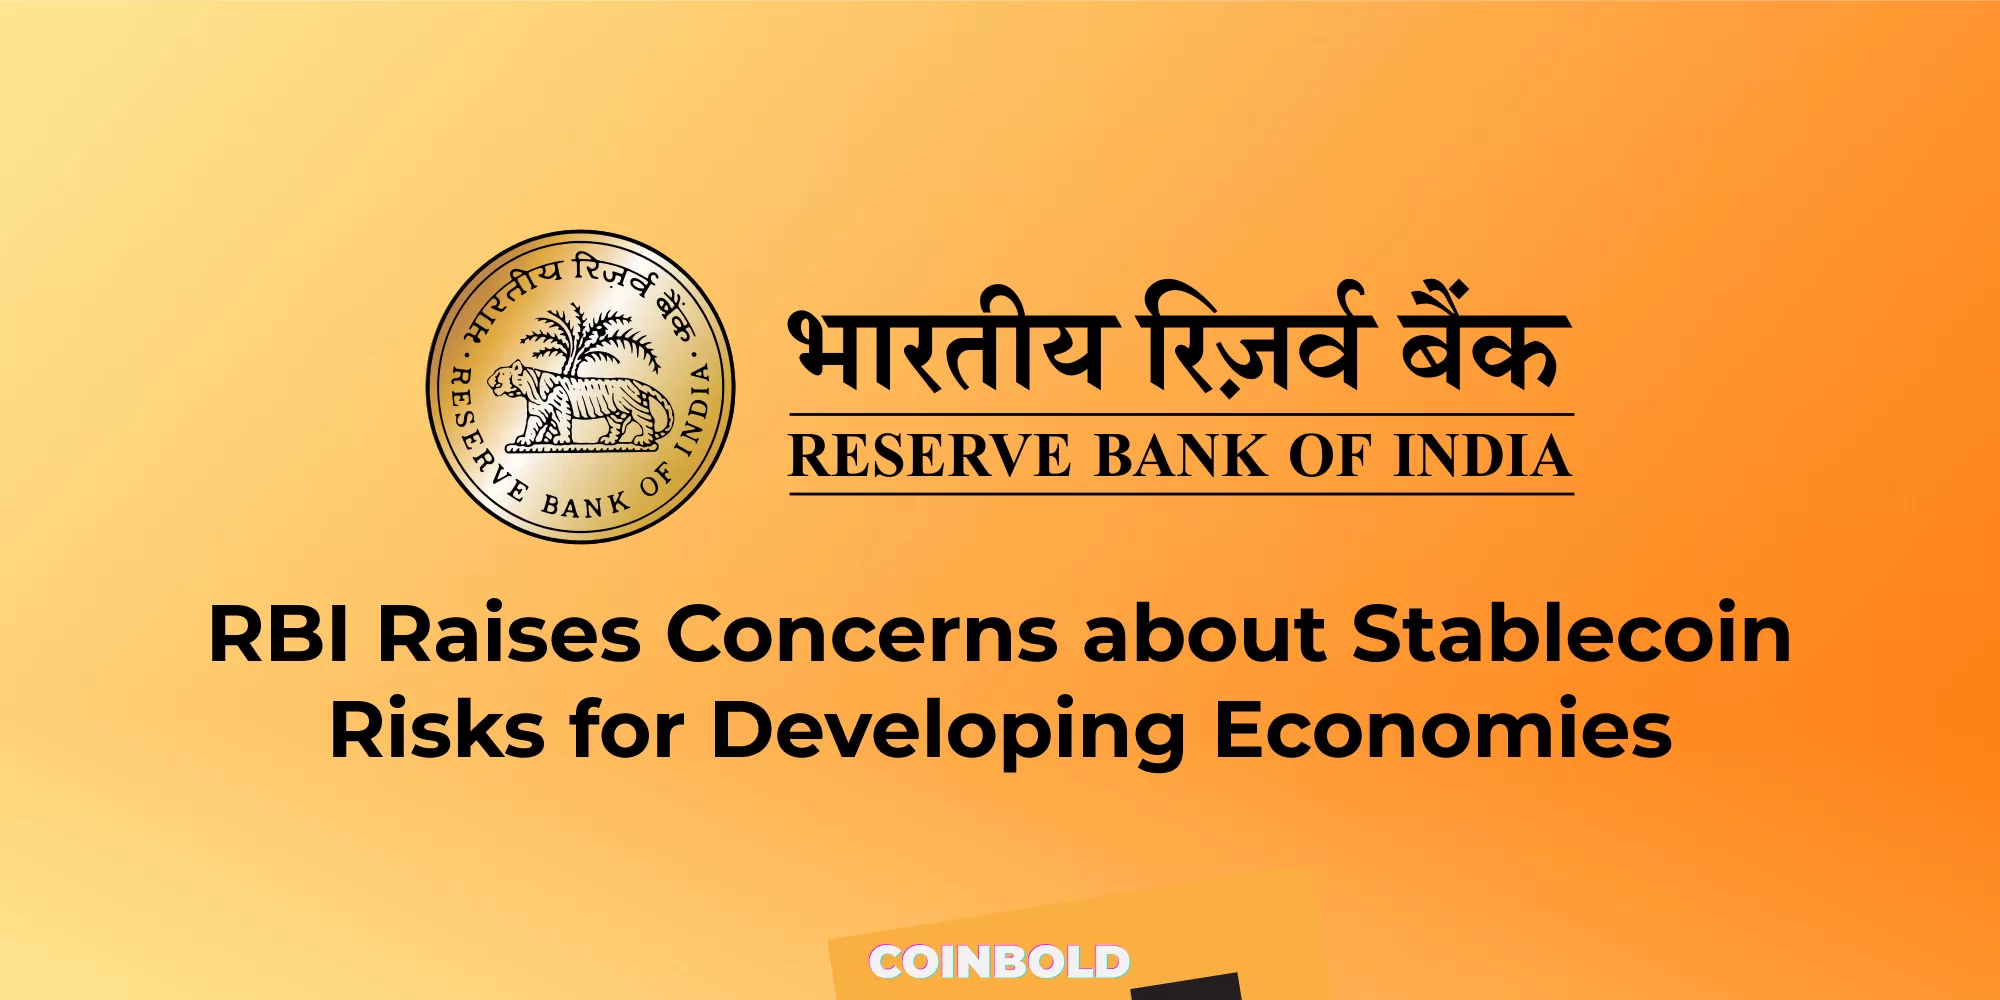 RBI Raises Concerns about Stablecoin Risks for Developing Economies